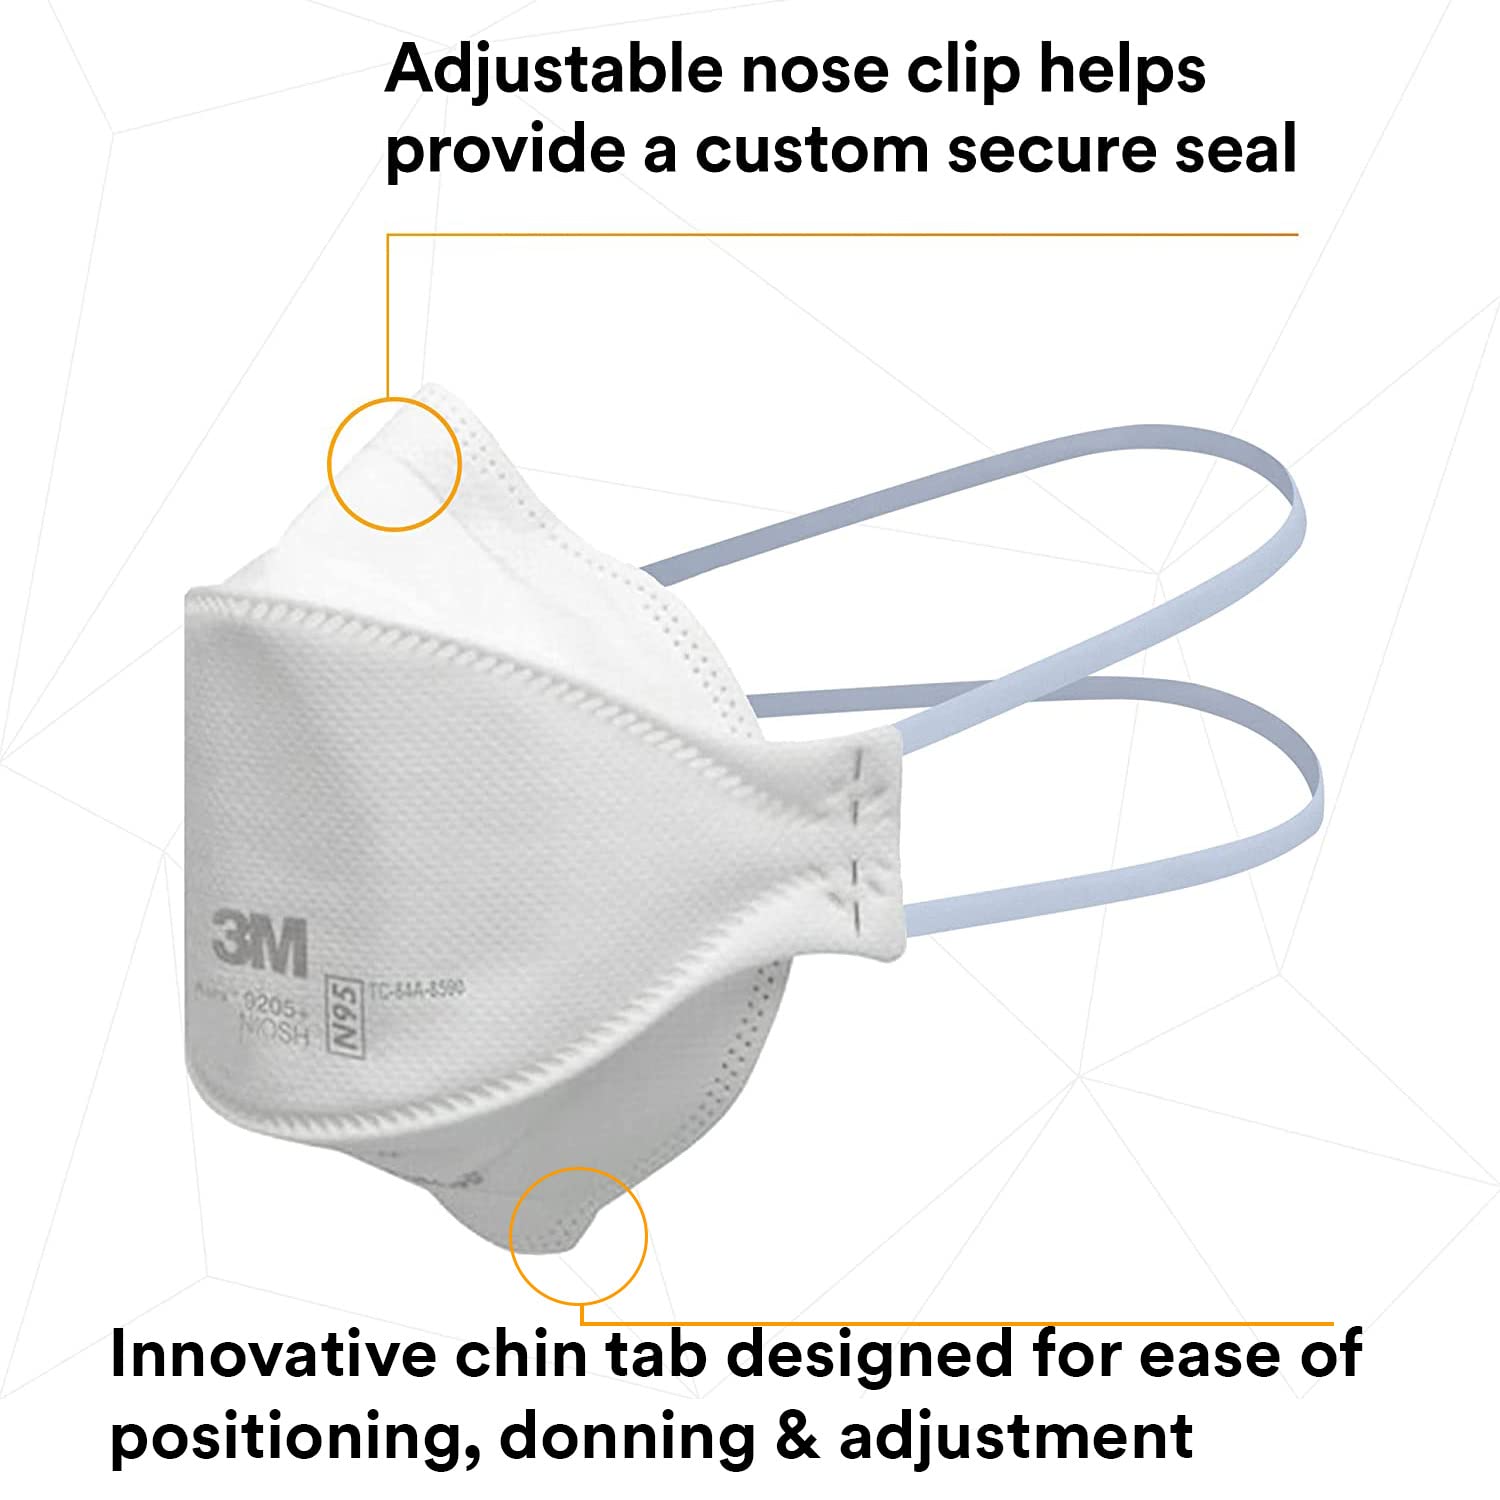 3M Aura Particulate Respirator 9205+, N95, Pack of 440 Disposable Respirators, Individually Wrapped, 3 Panel Flat Fold Design Allows for Facial Movements, Comfortable, NIOSH Approved